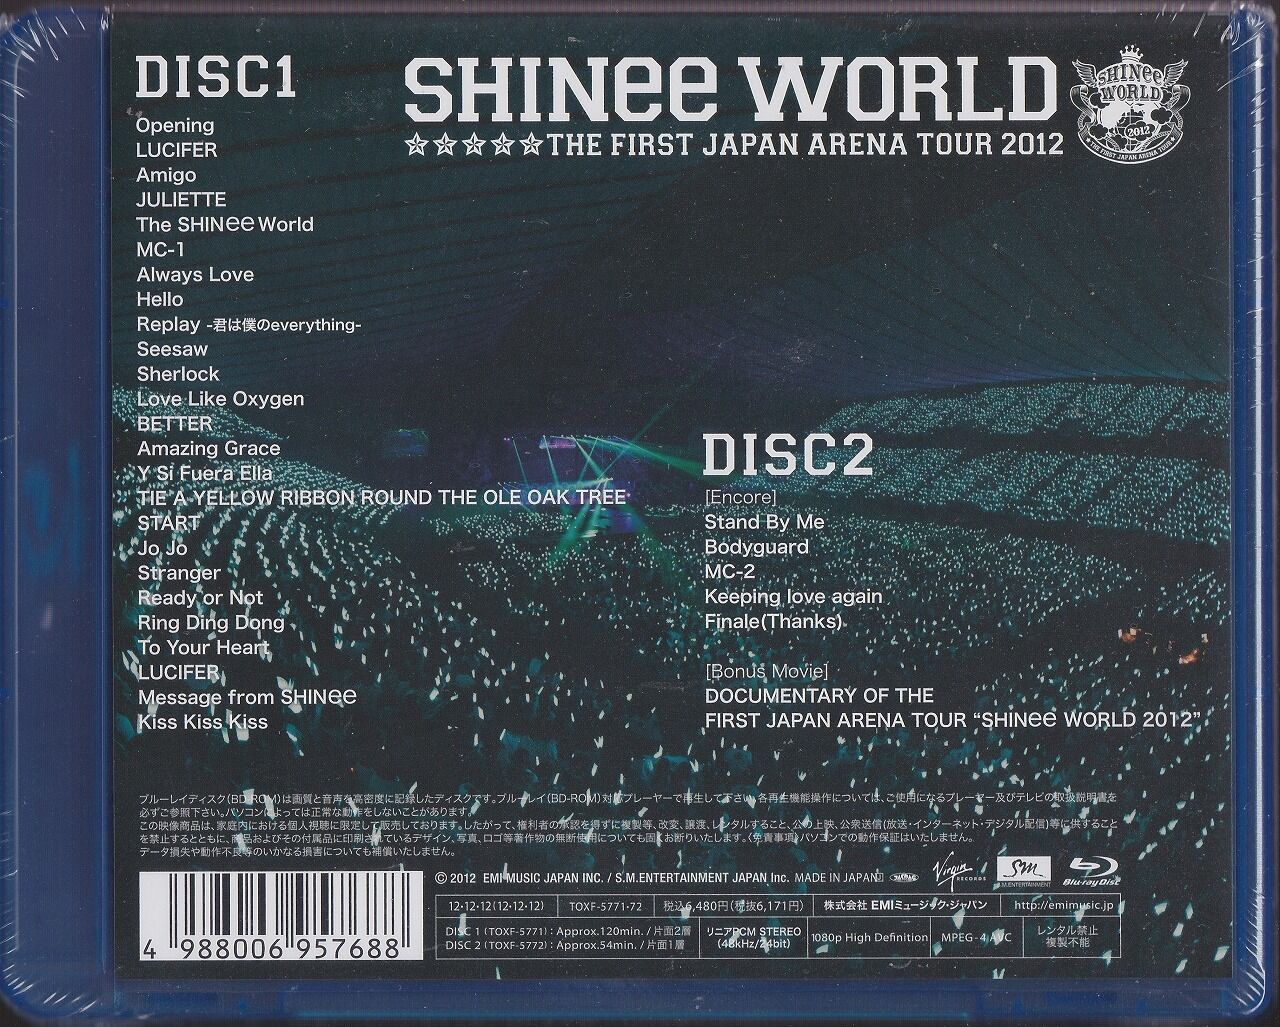 New SHINee WORLD THE FIRST JAPAN ARENA TOUR 2012 Blu-ray TOXF-5771  4988006957688